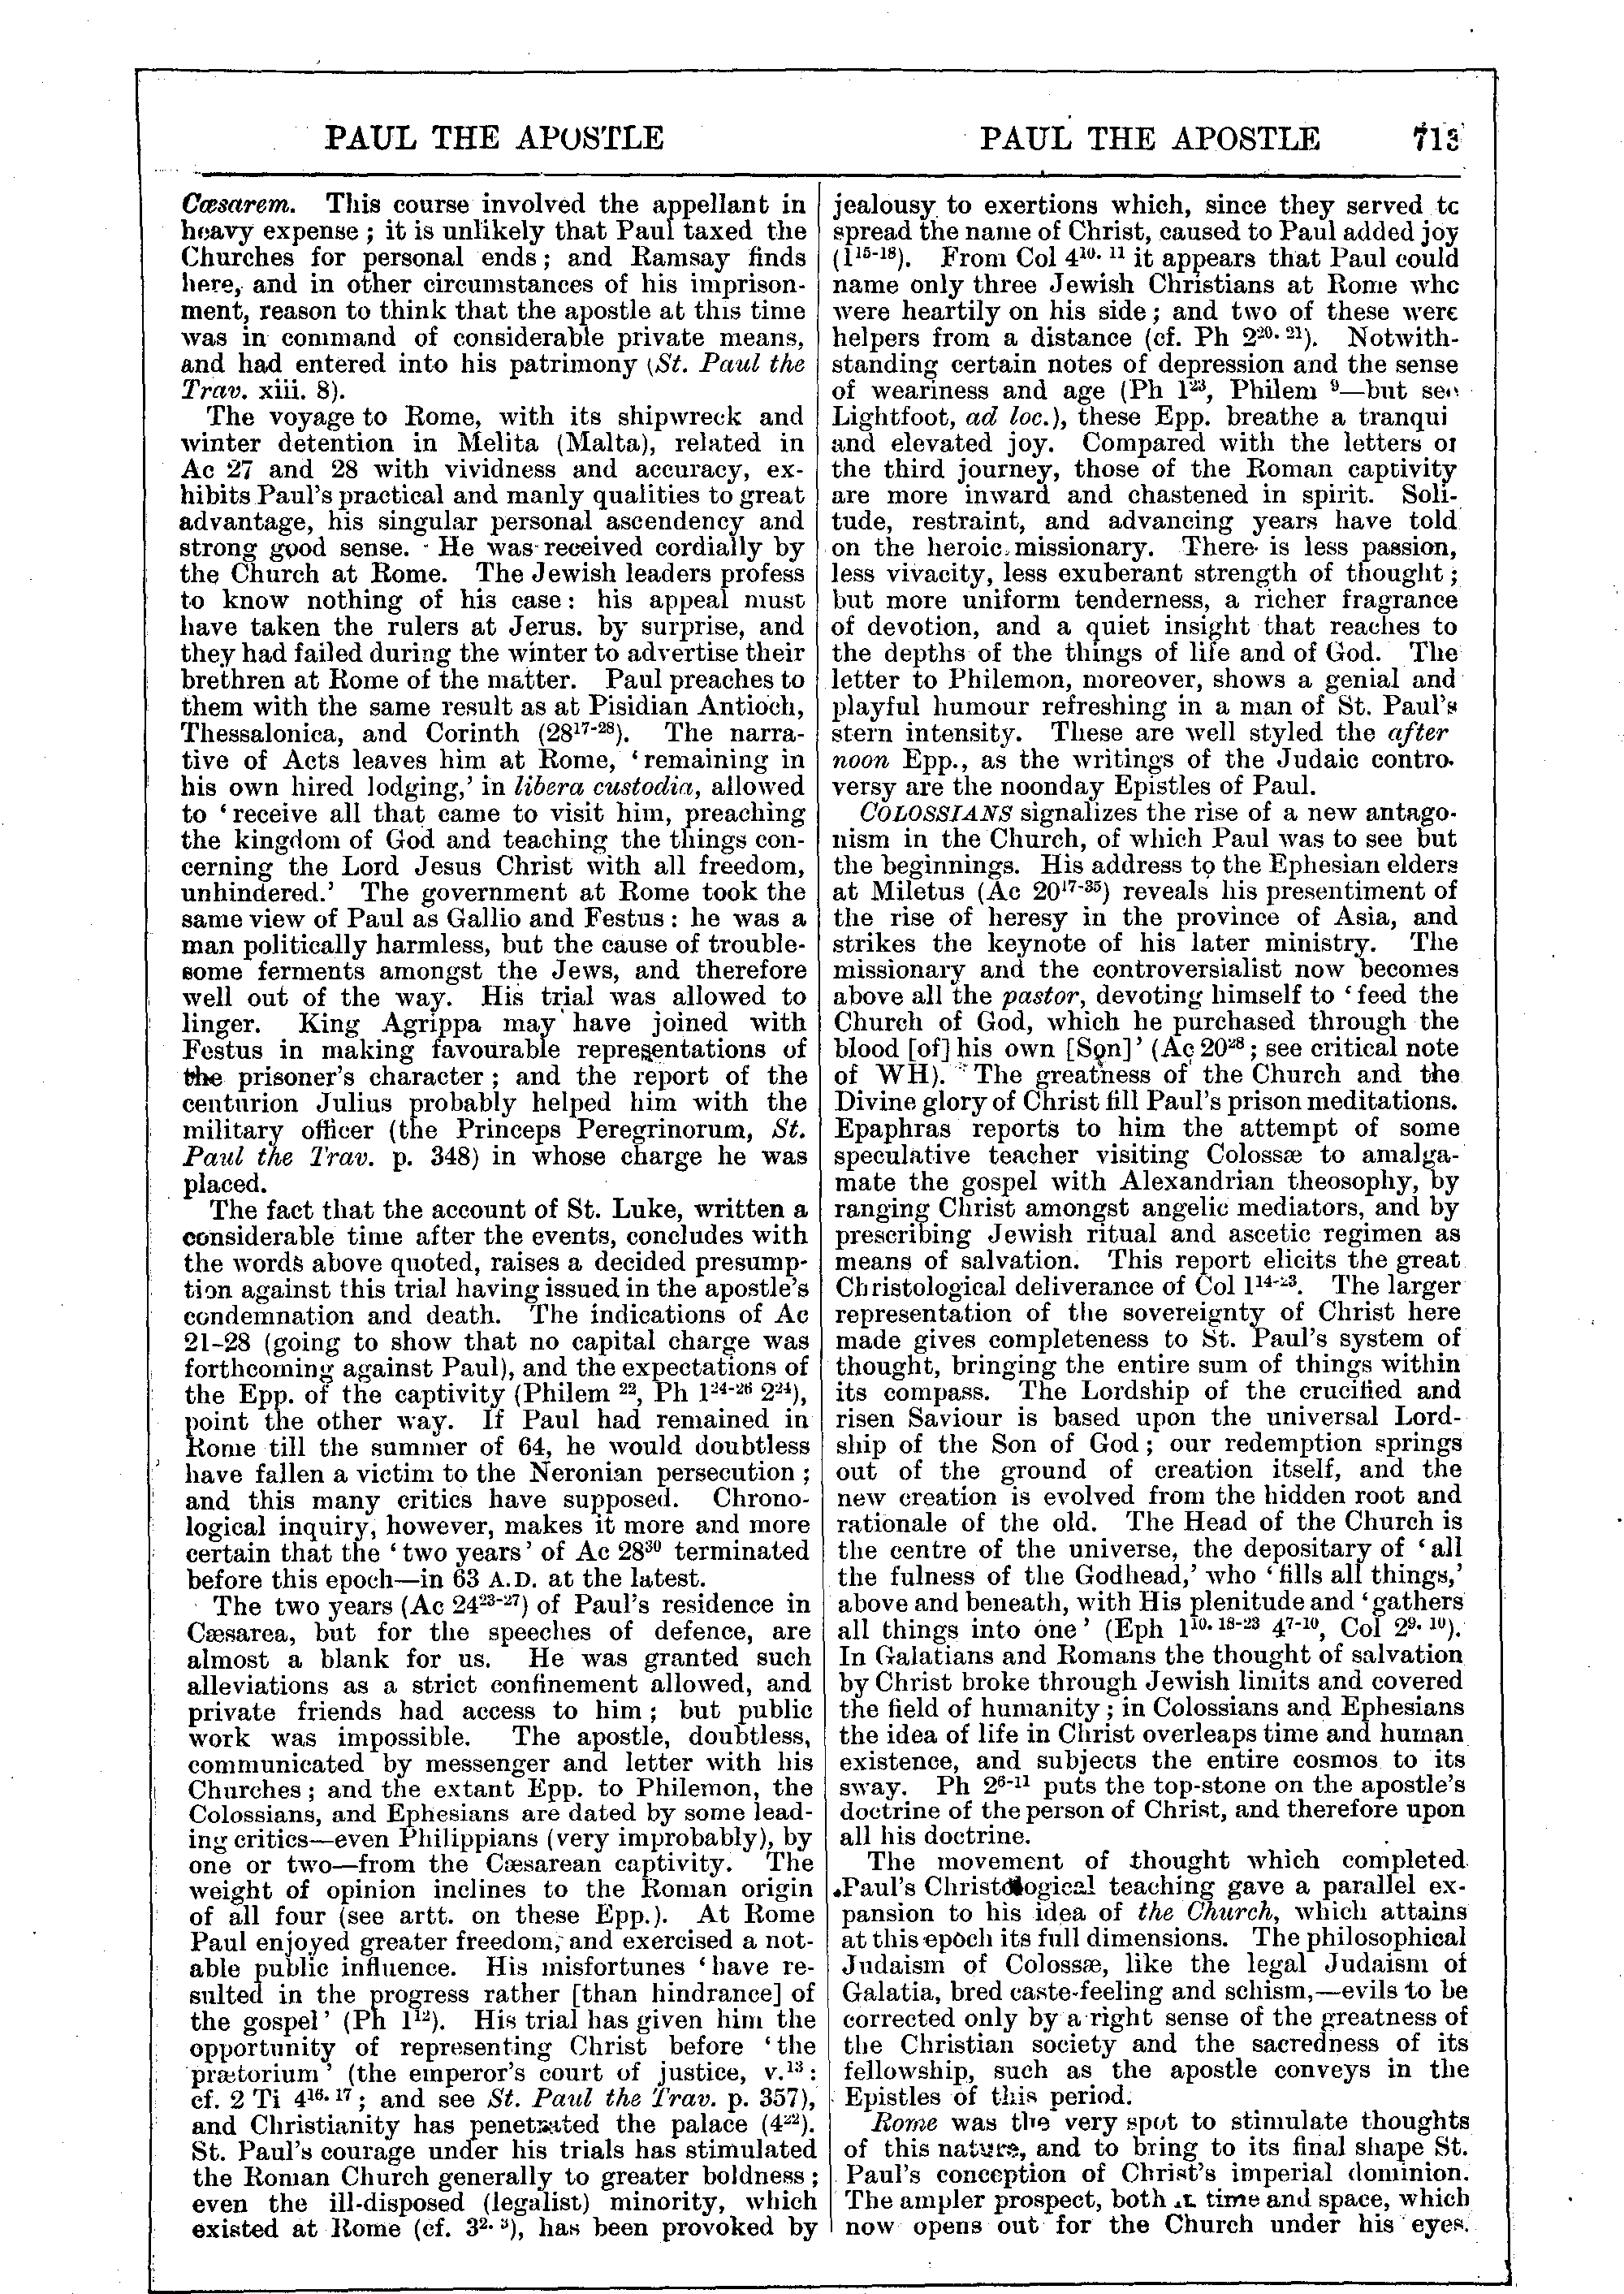 Image of page 713